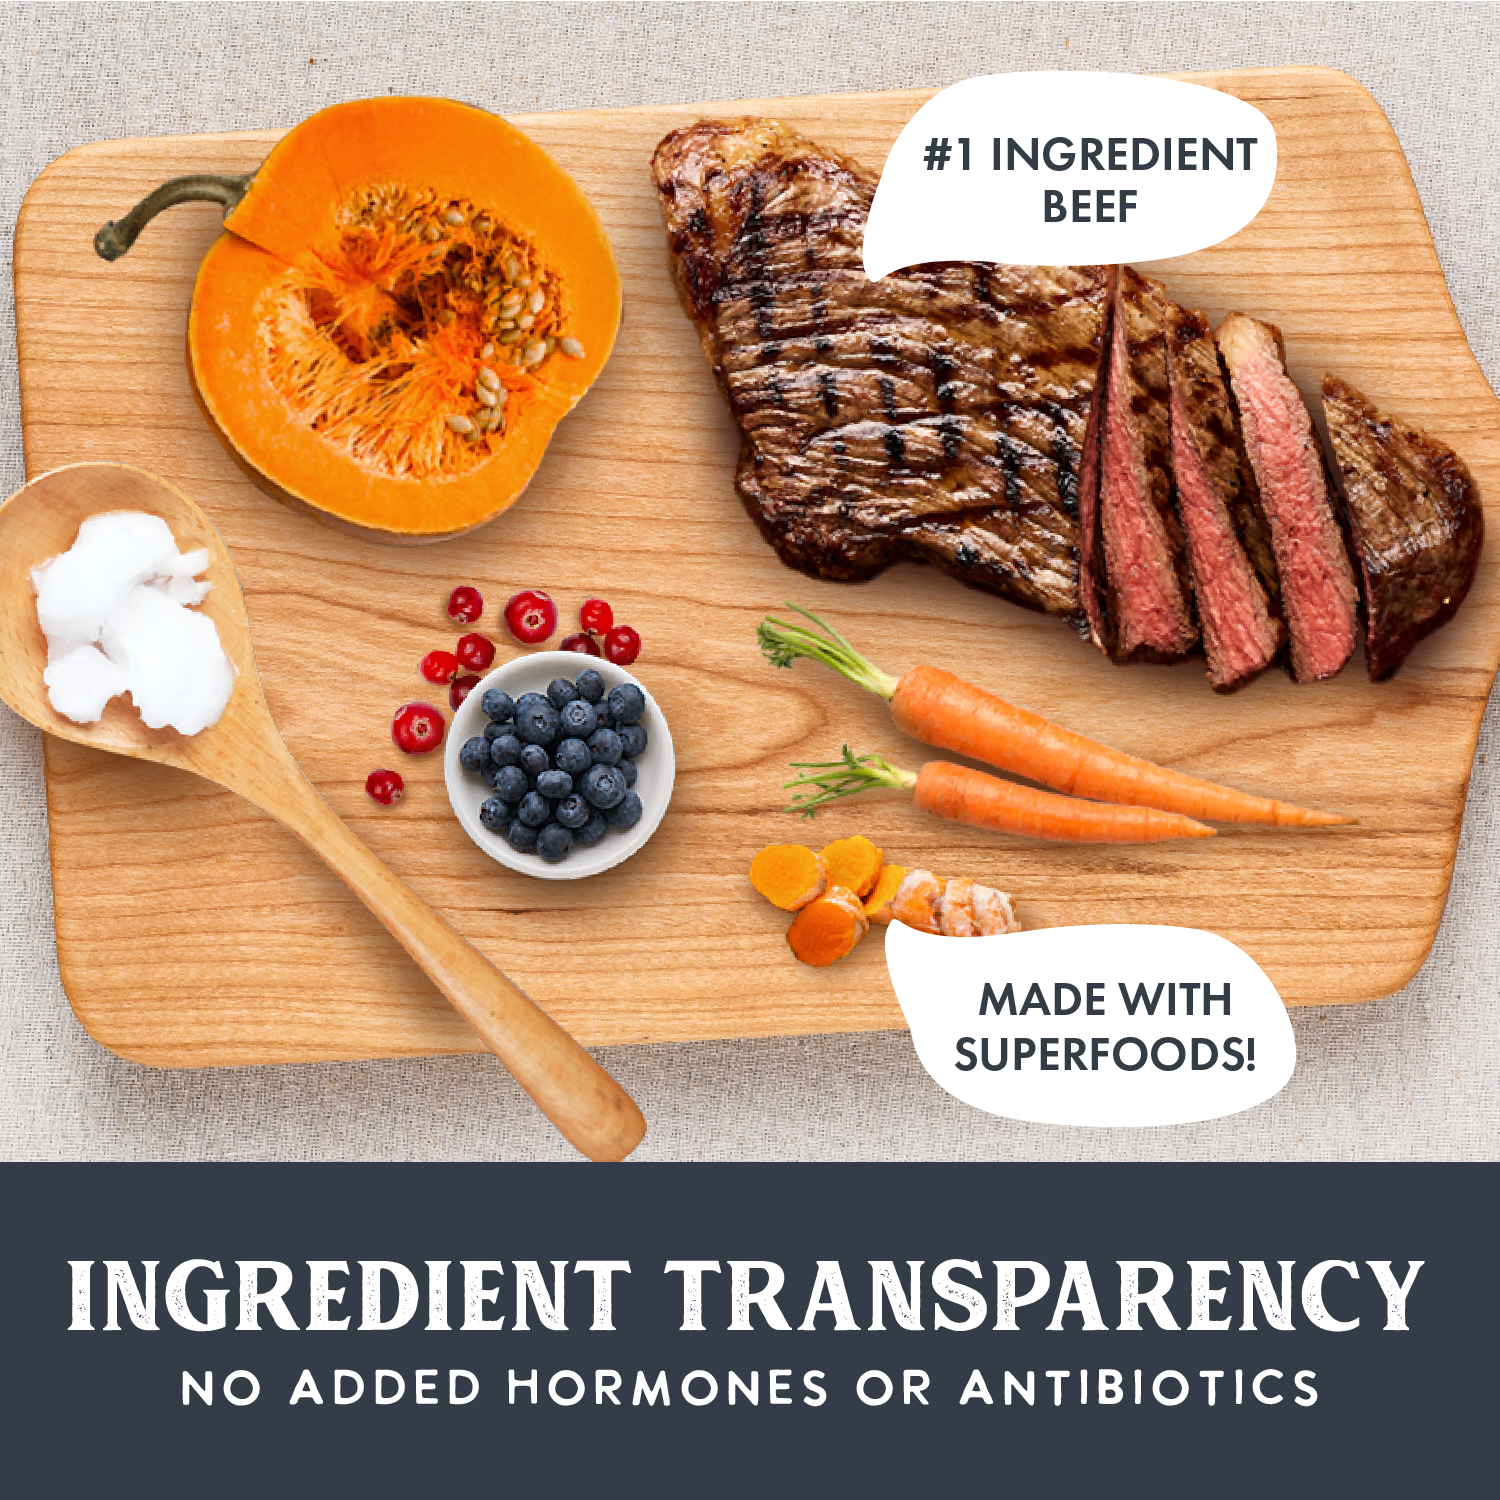 High-quality ingredients for Health Extension dog food displayed, featuring beef as the #1 ingredient, alongside superfoods.